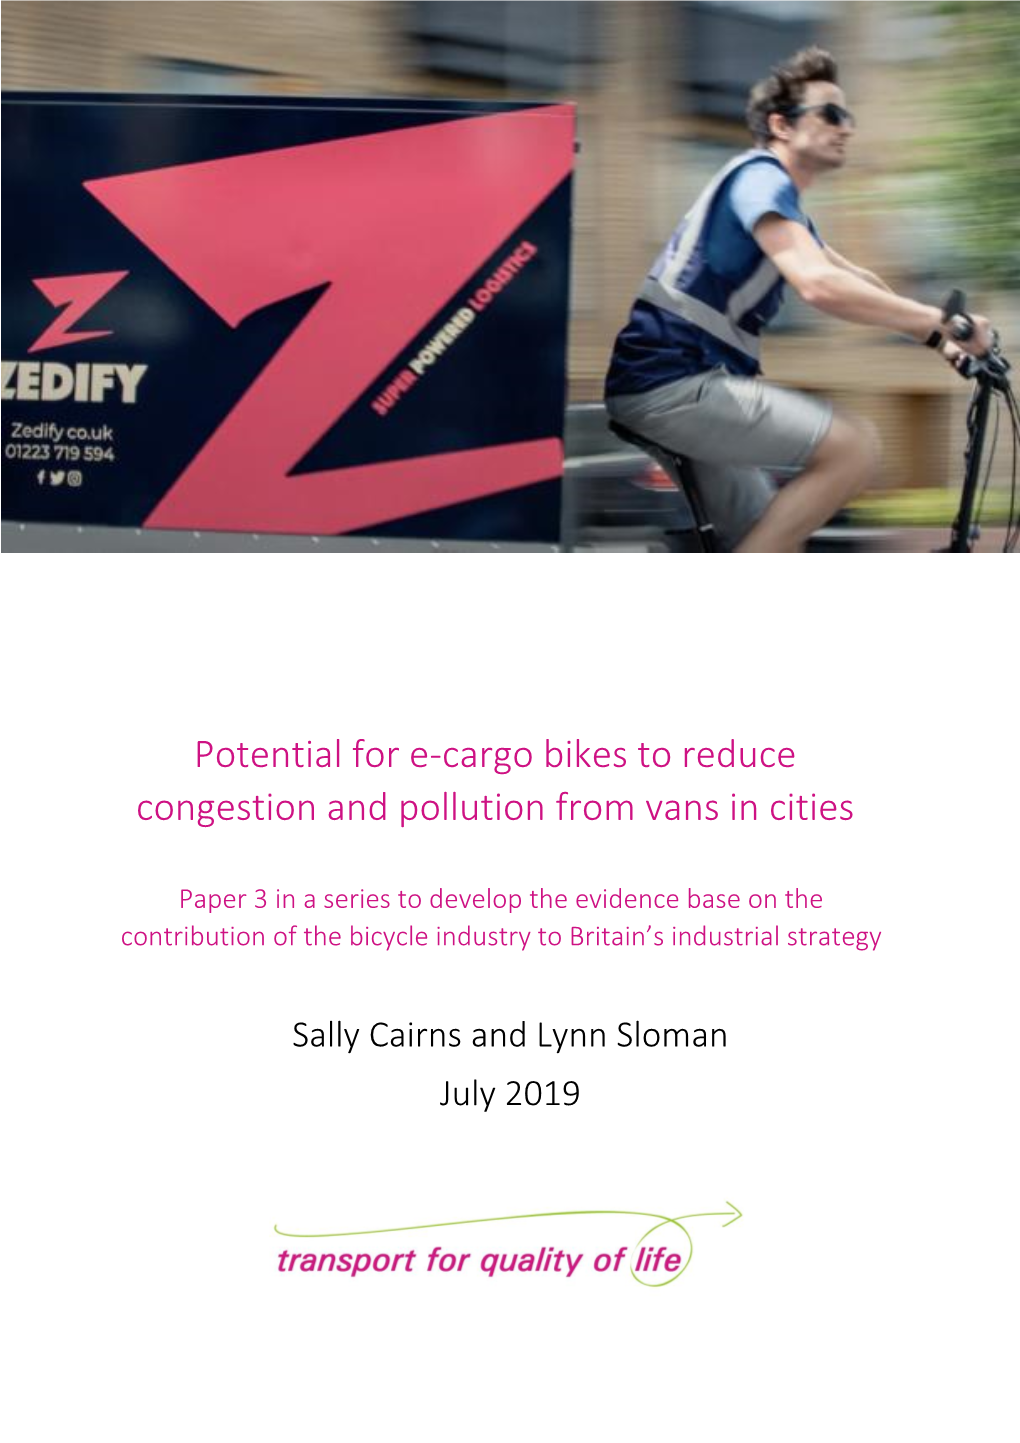 Potential for E-Cargo Bikes to Reduce Congestion and Pollution from Vans in Cities